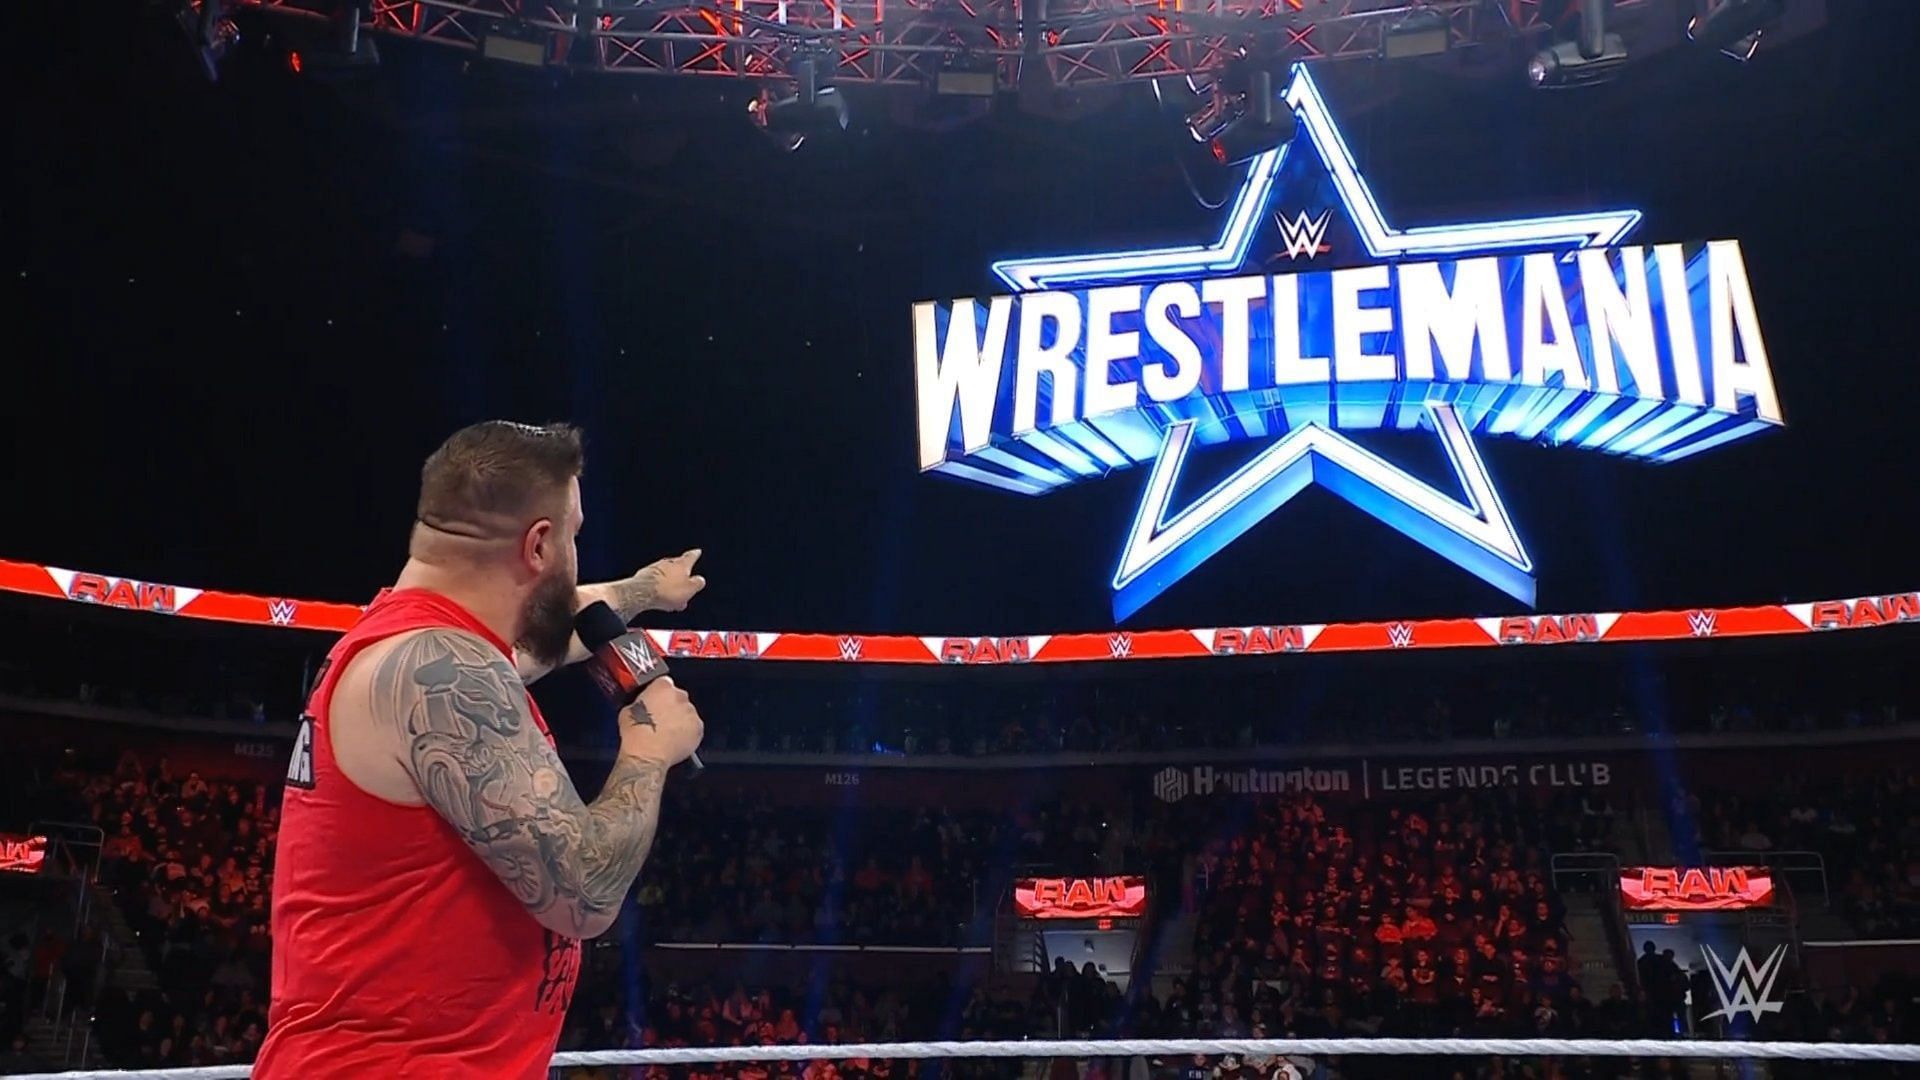 Kevin Owens pointing at the WrestleMania 38 sign.